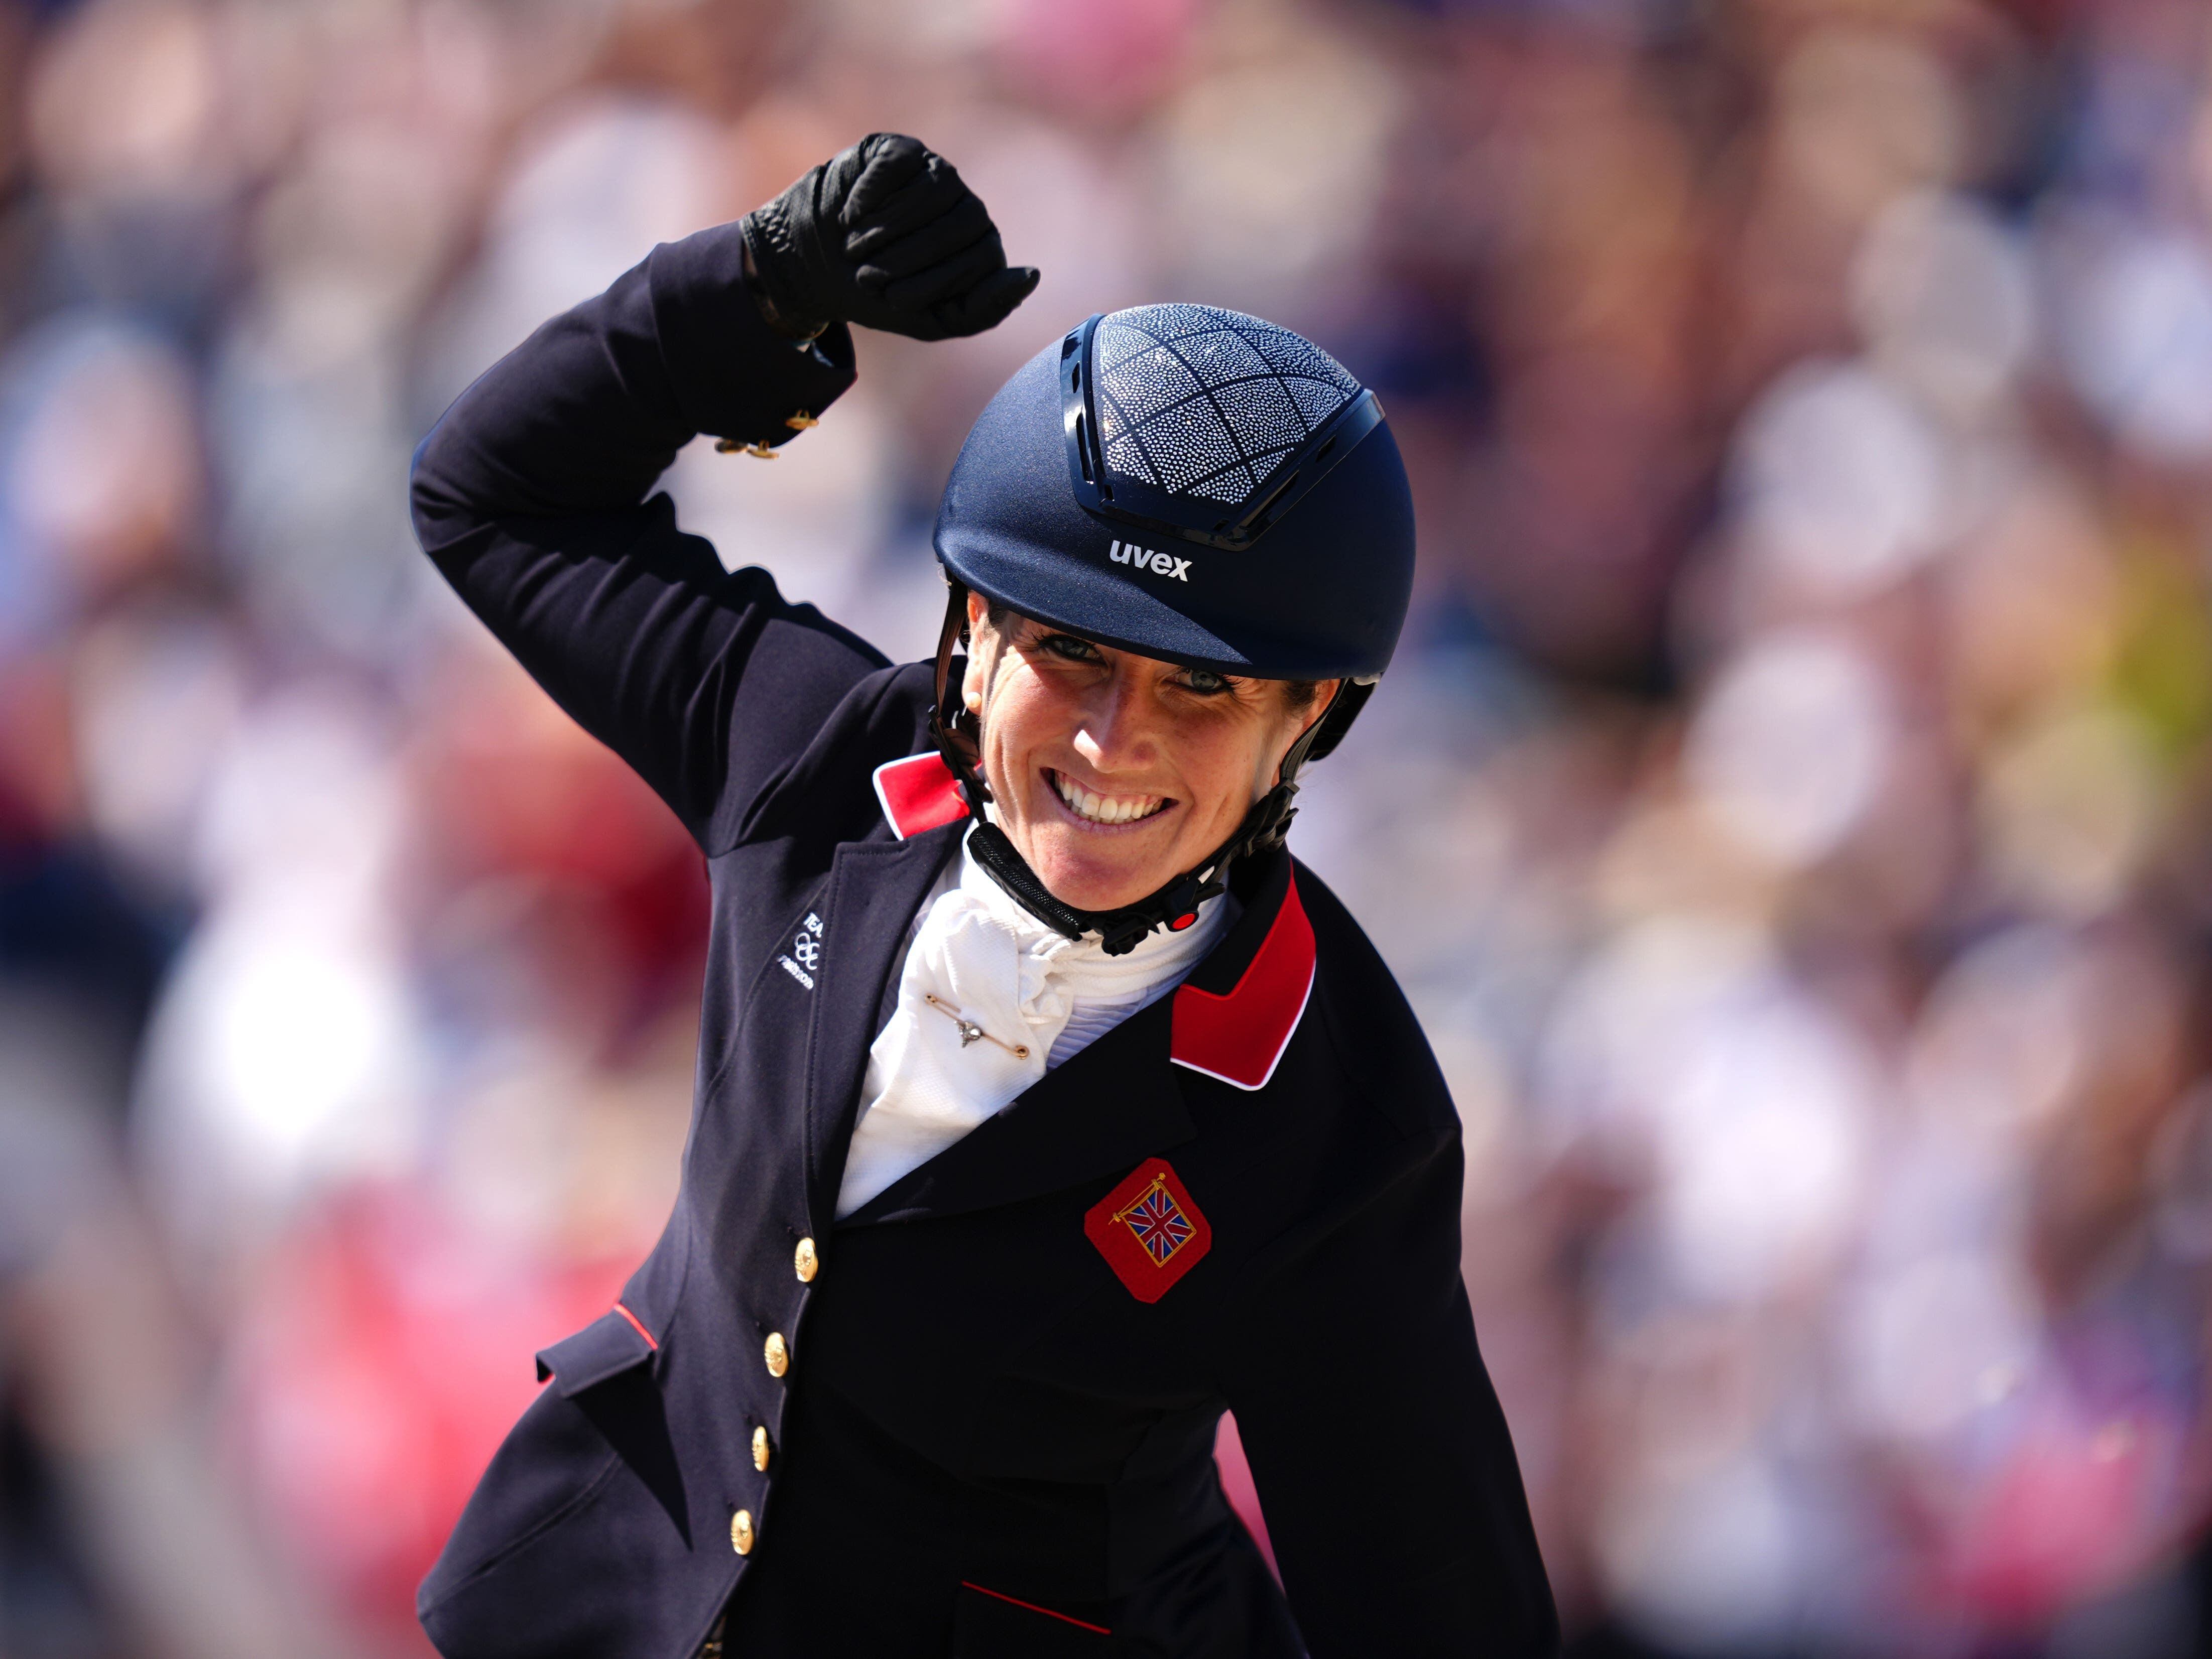 Laura Collett bags bronze medal for Great Britain in the individual eventing